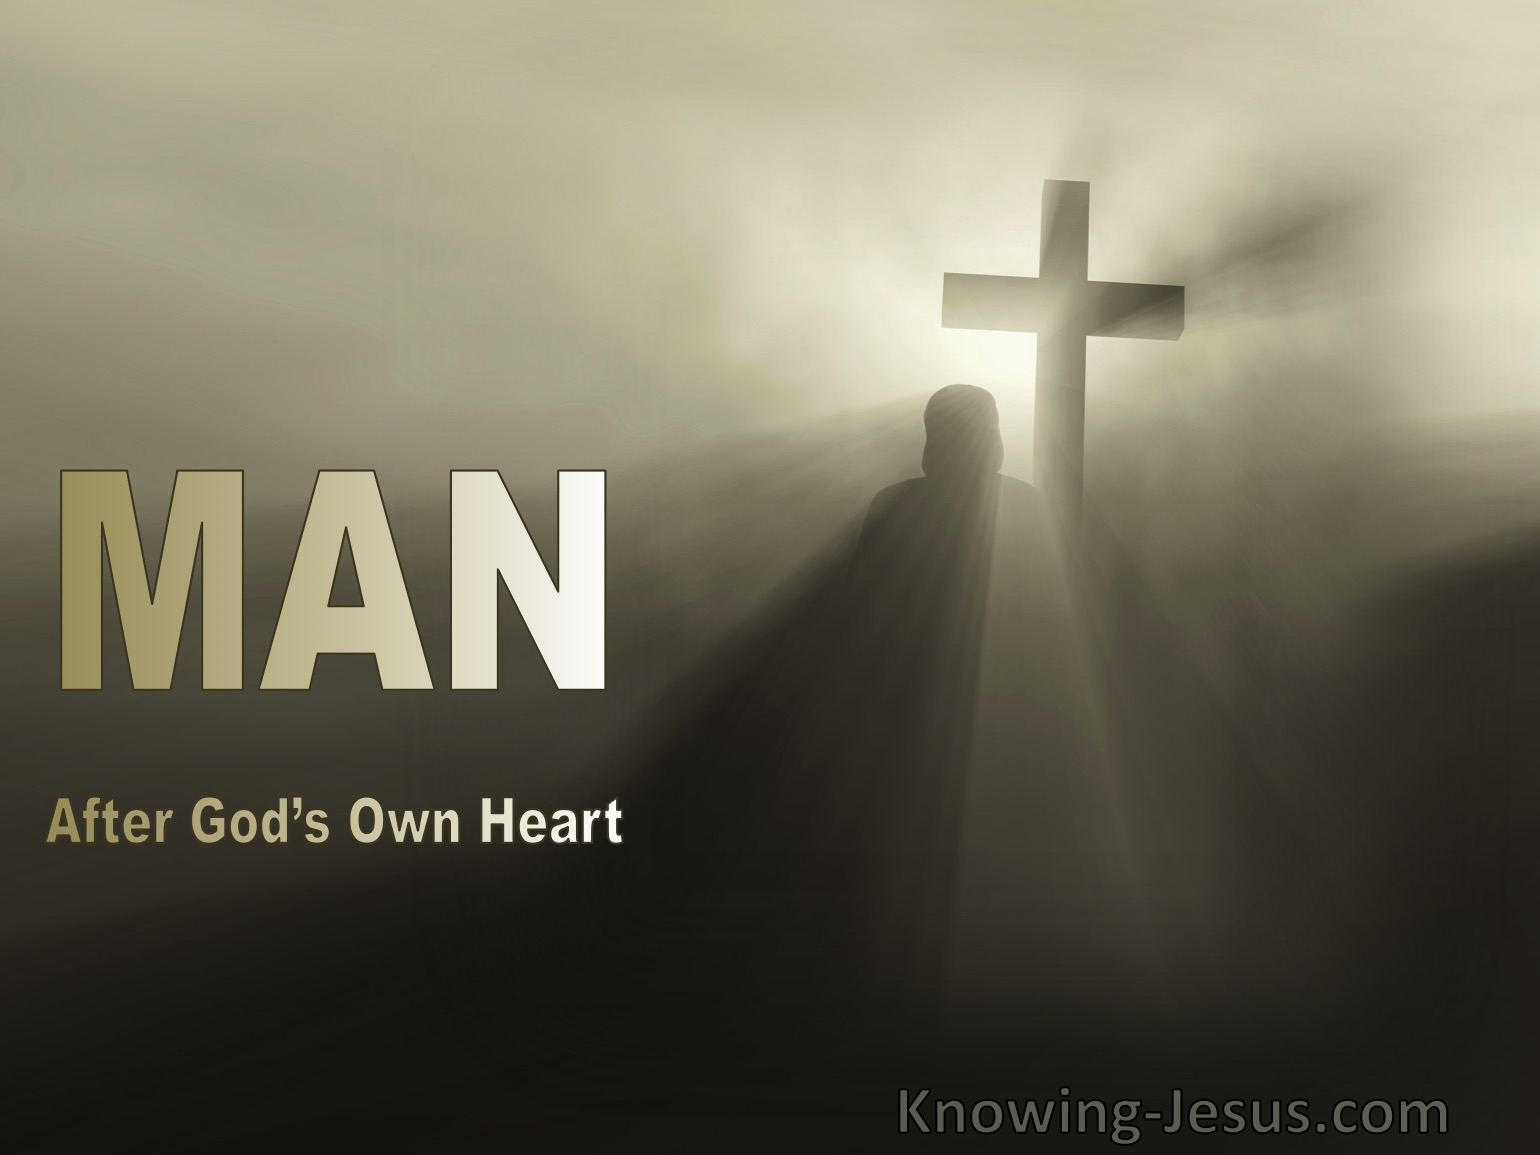 The Man After God's Own Heart